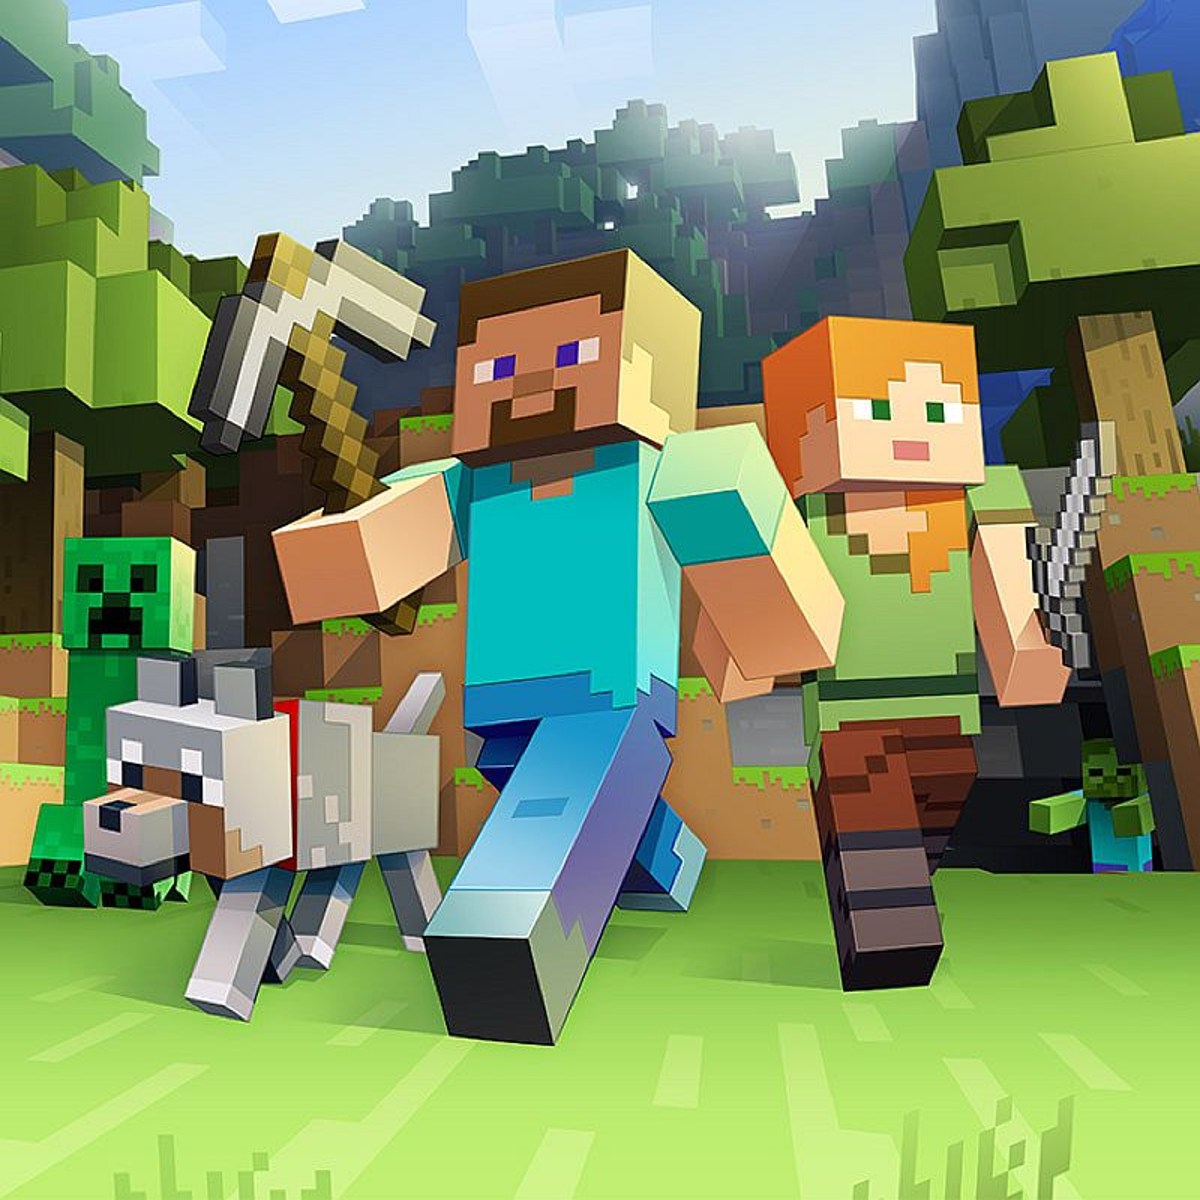 You can now play 2D Minecraft in the Minecraft chat window